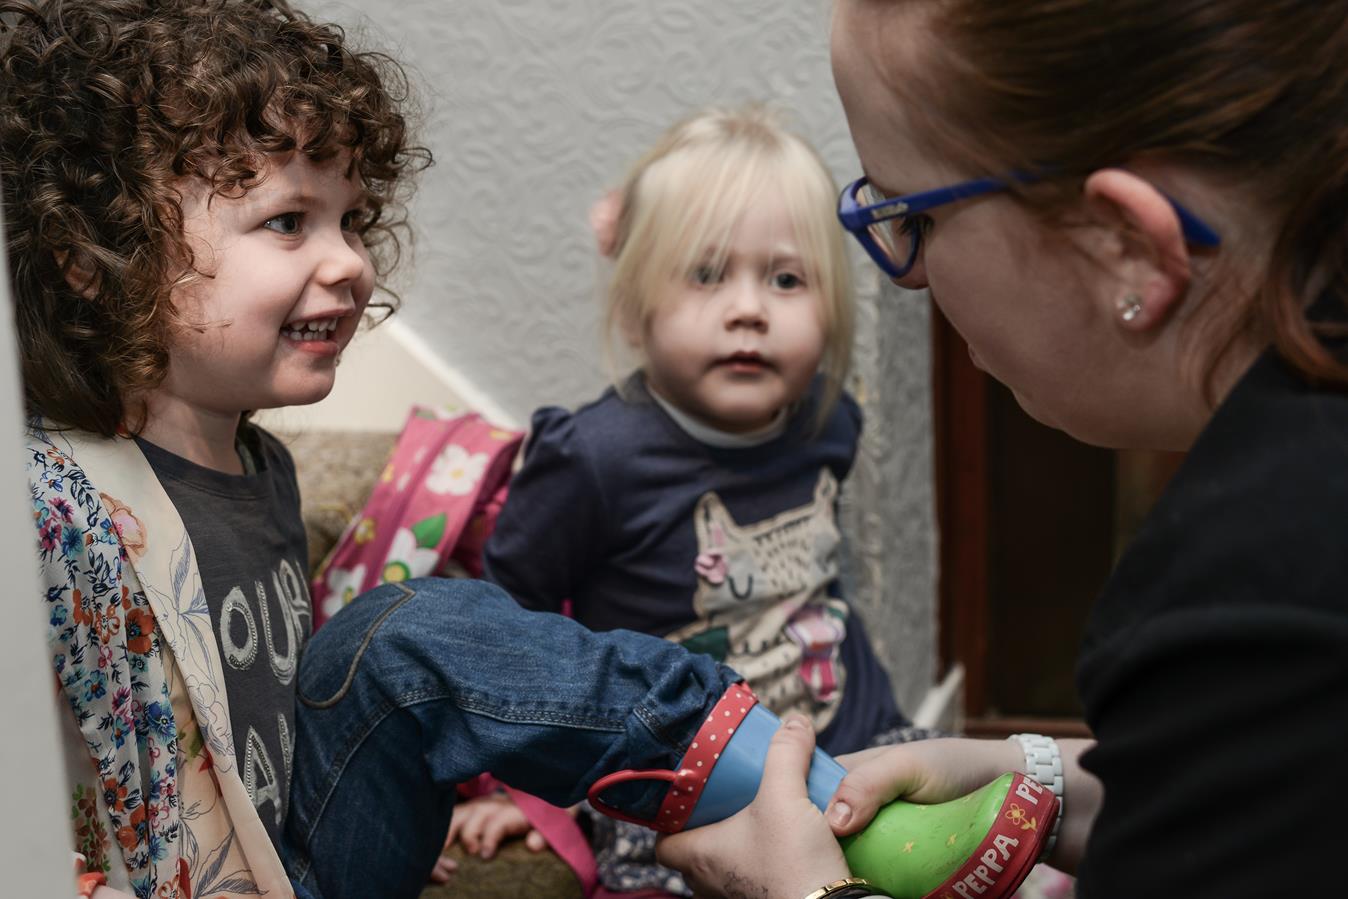 Significant Audit Scotland report highlights ‘risks’ for Early Learning and Childcare